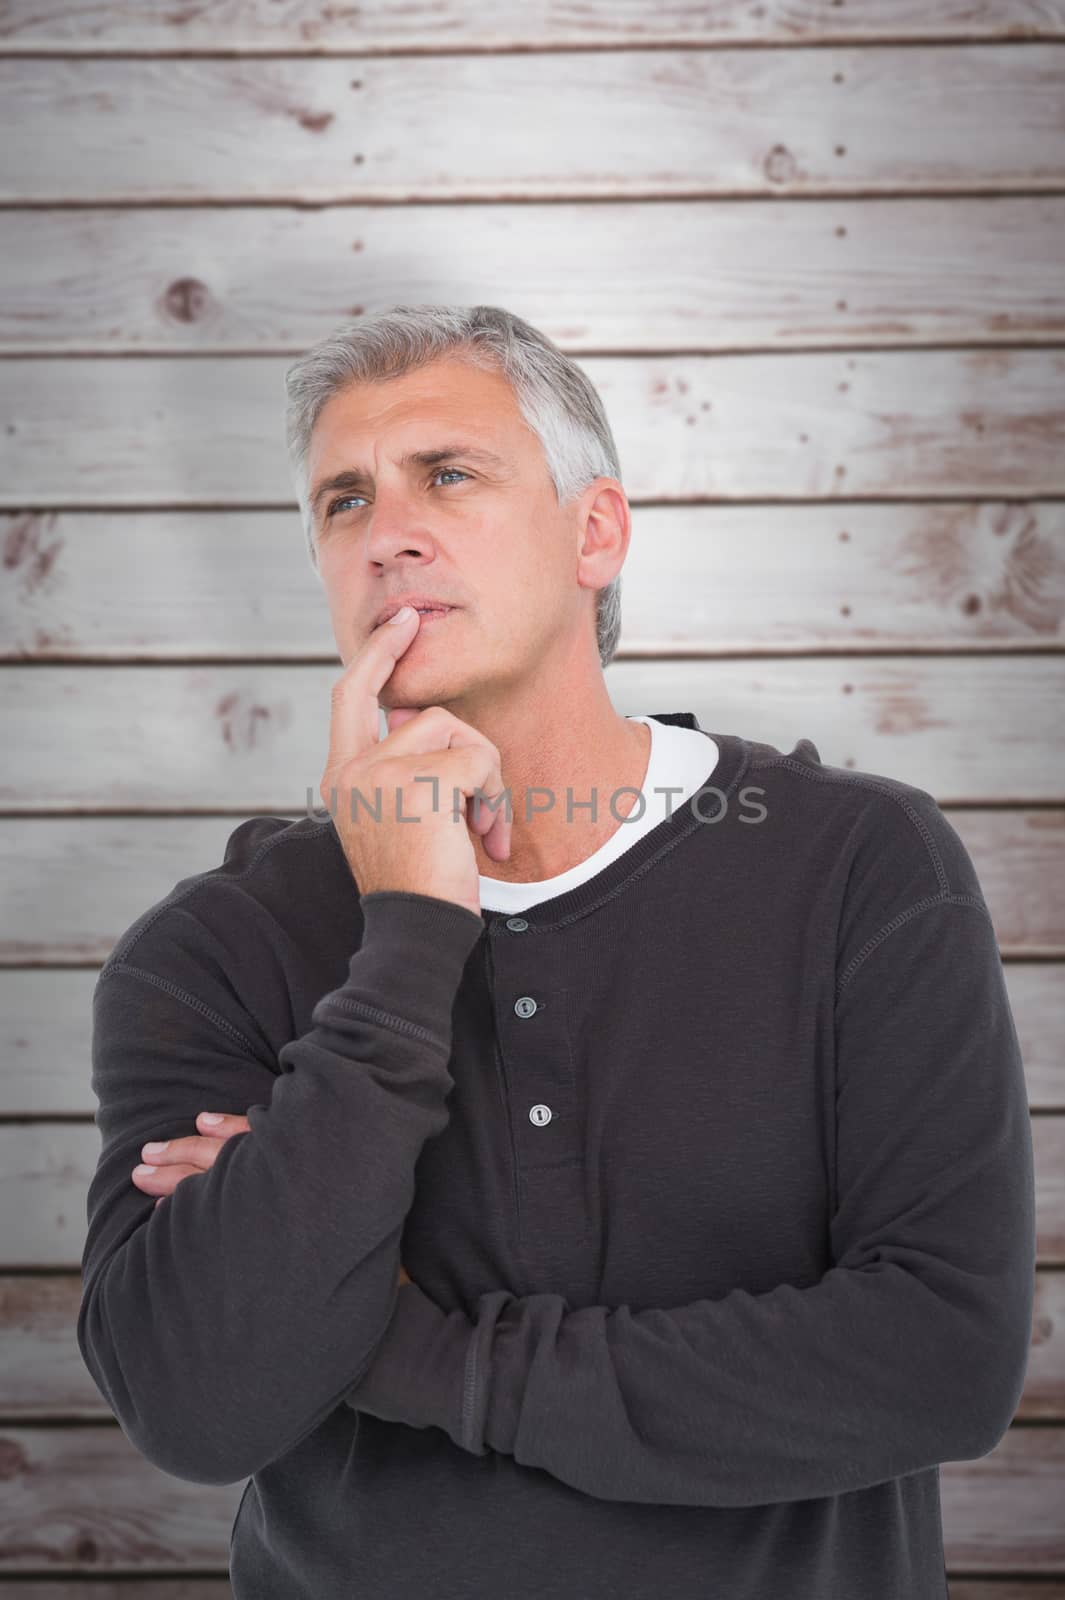 Casual man thinking with hand on chin against wooden planks